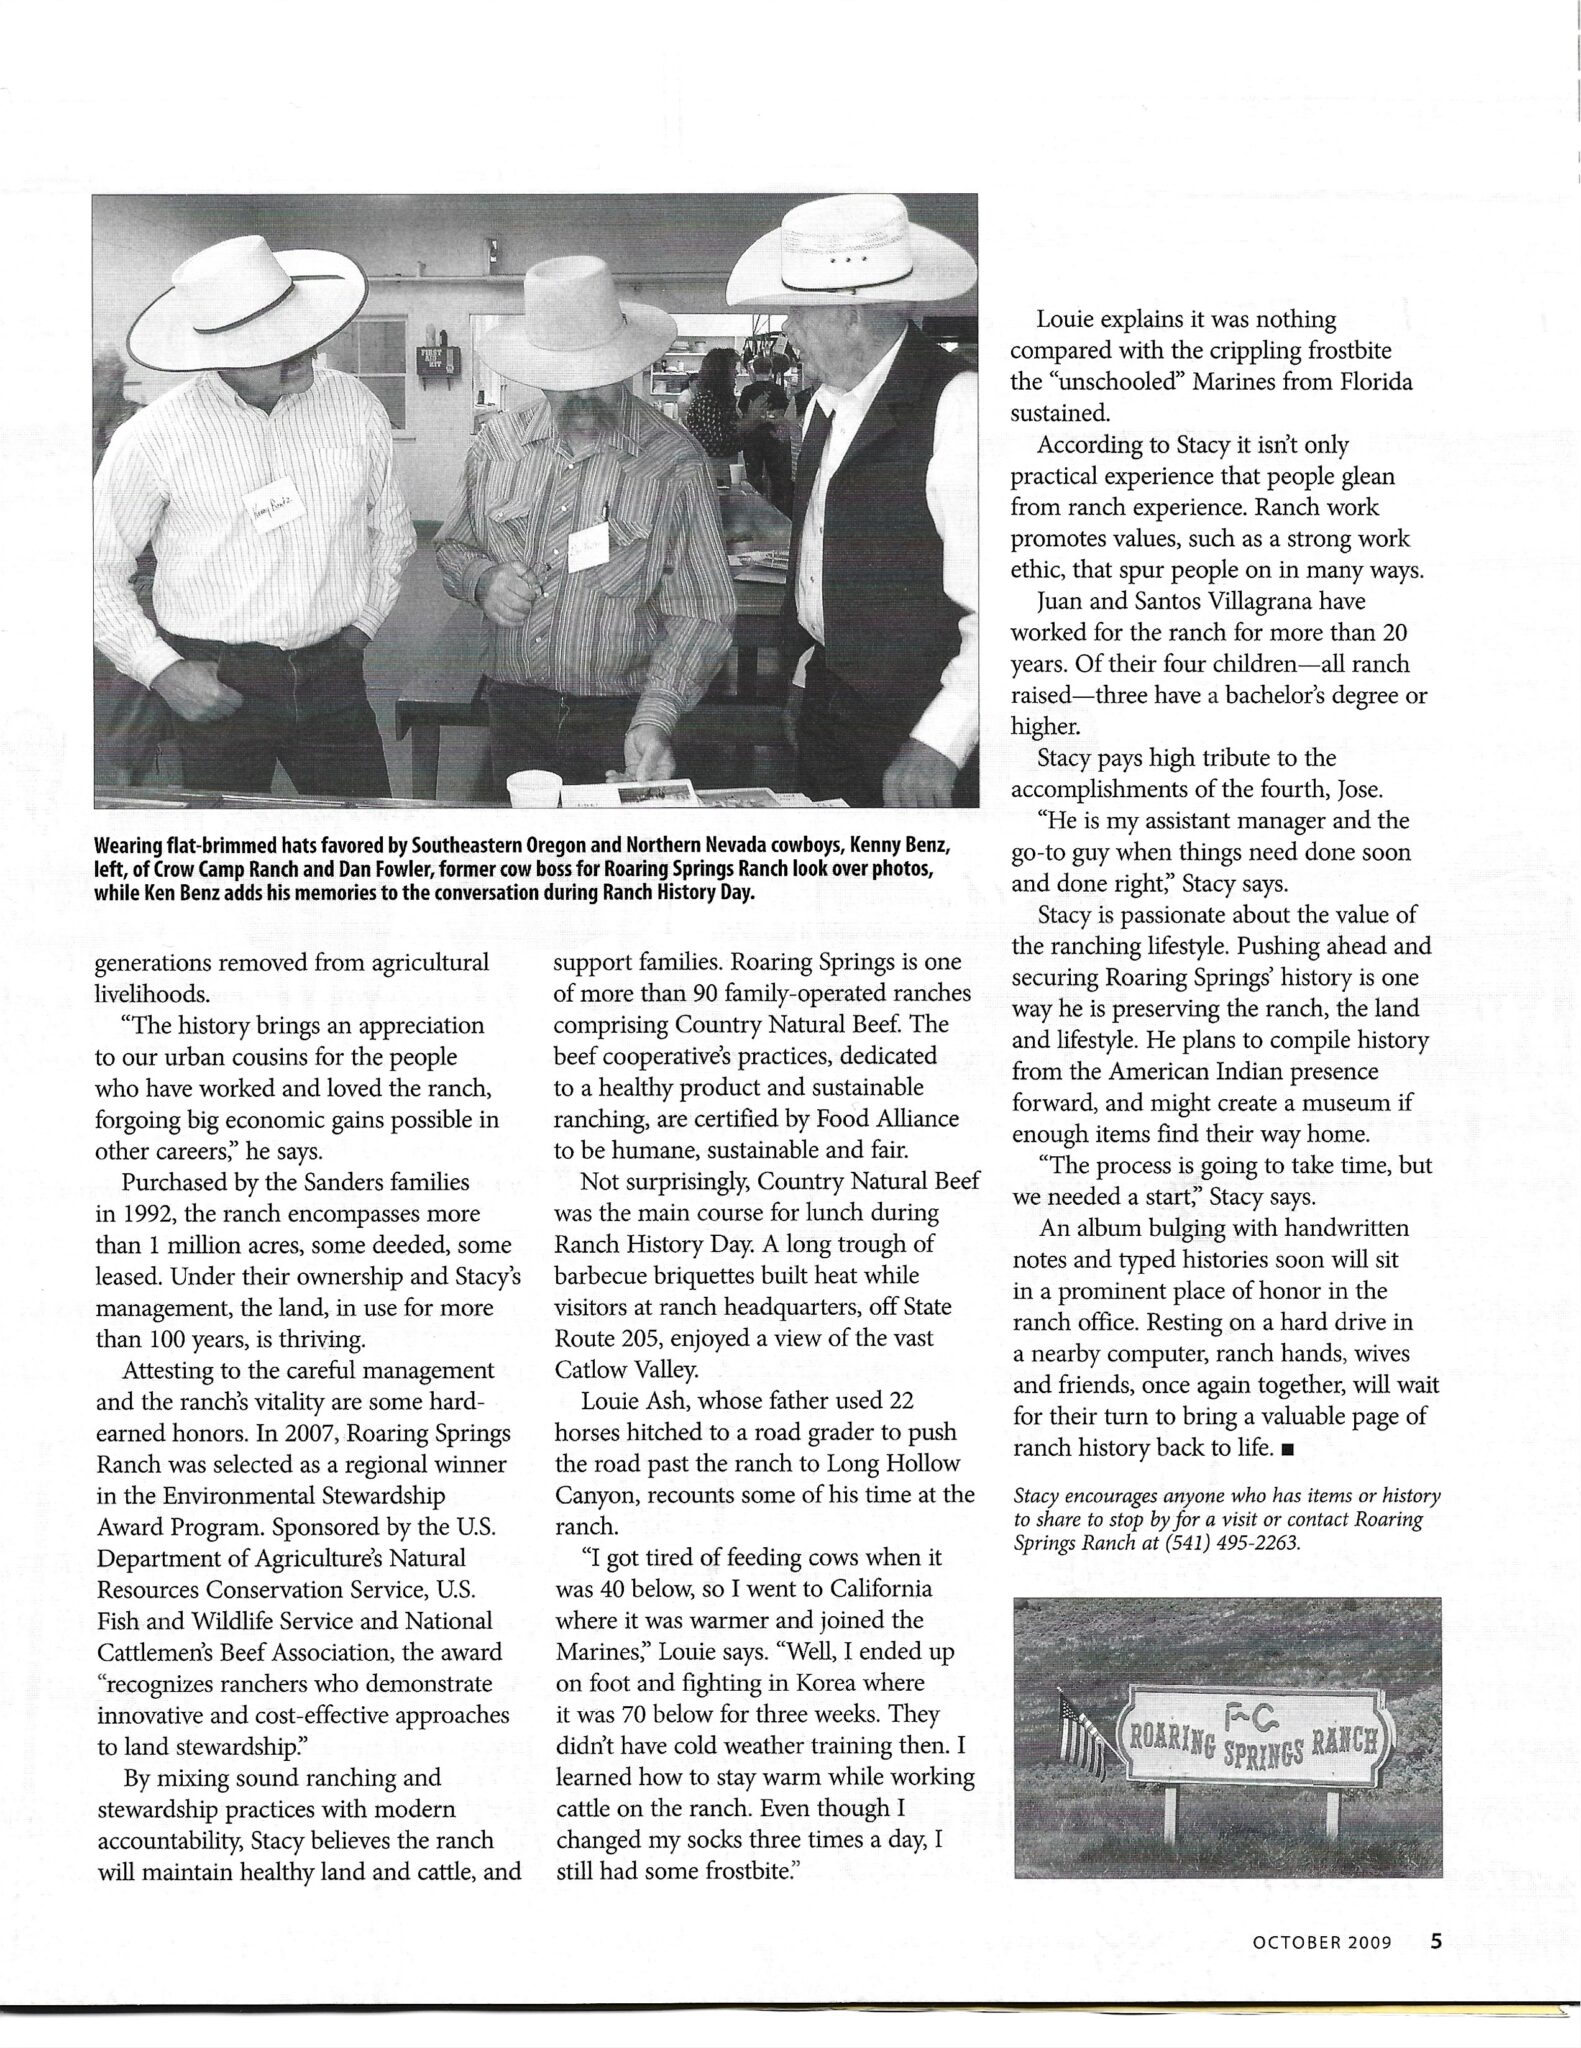 History Days Story Page 2